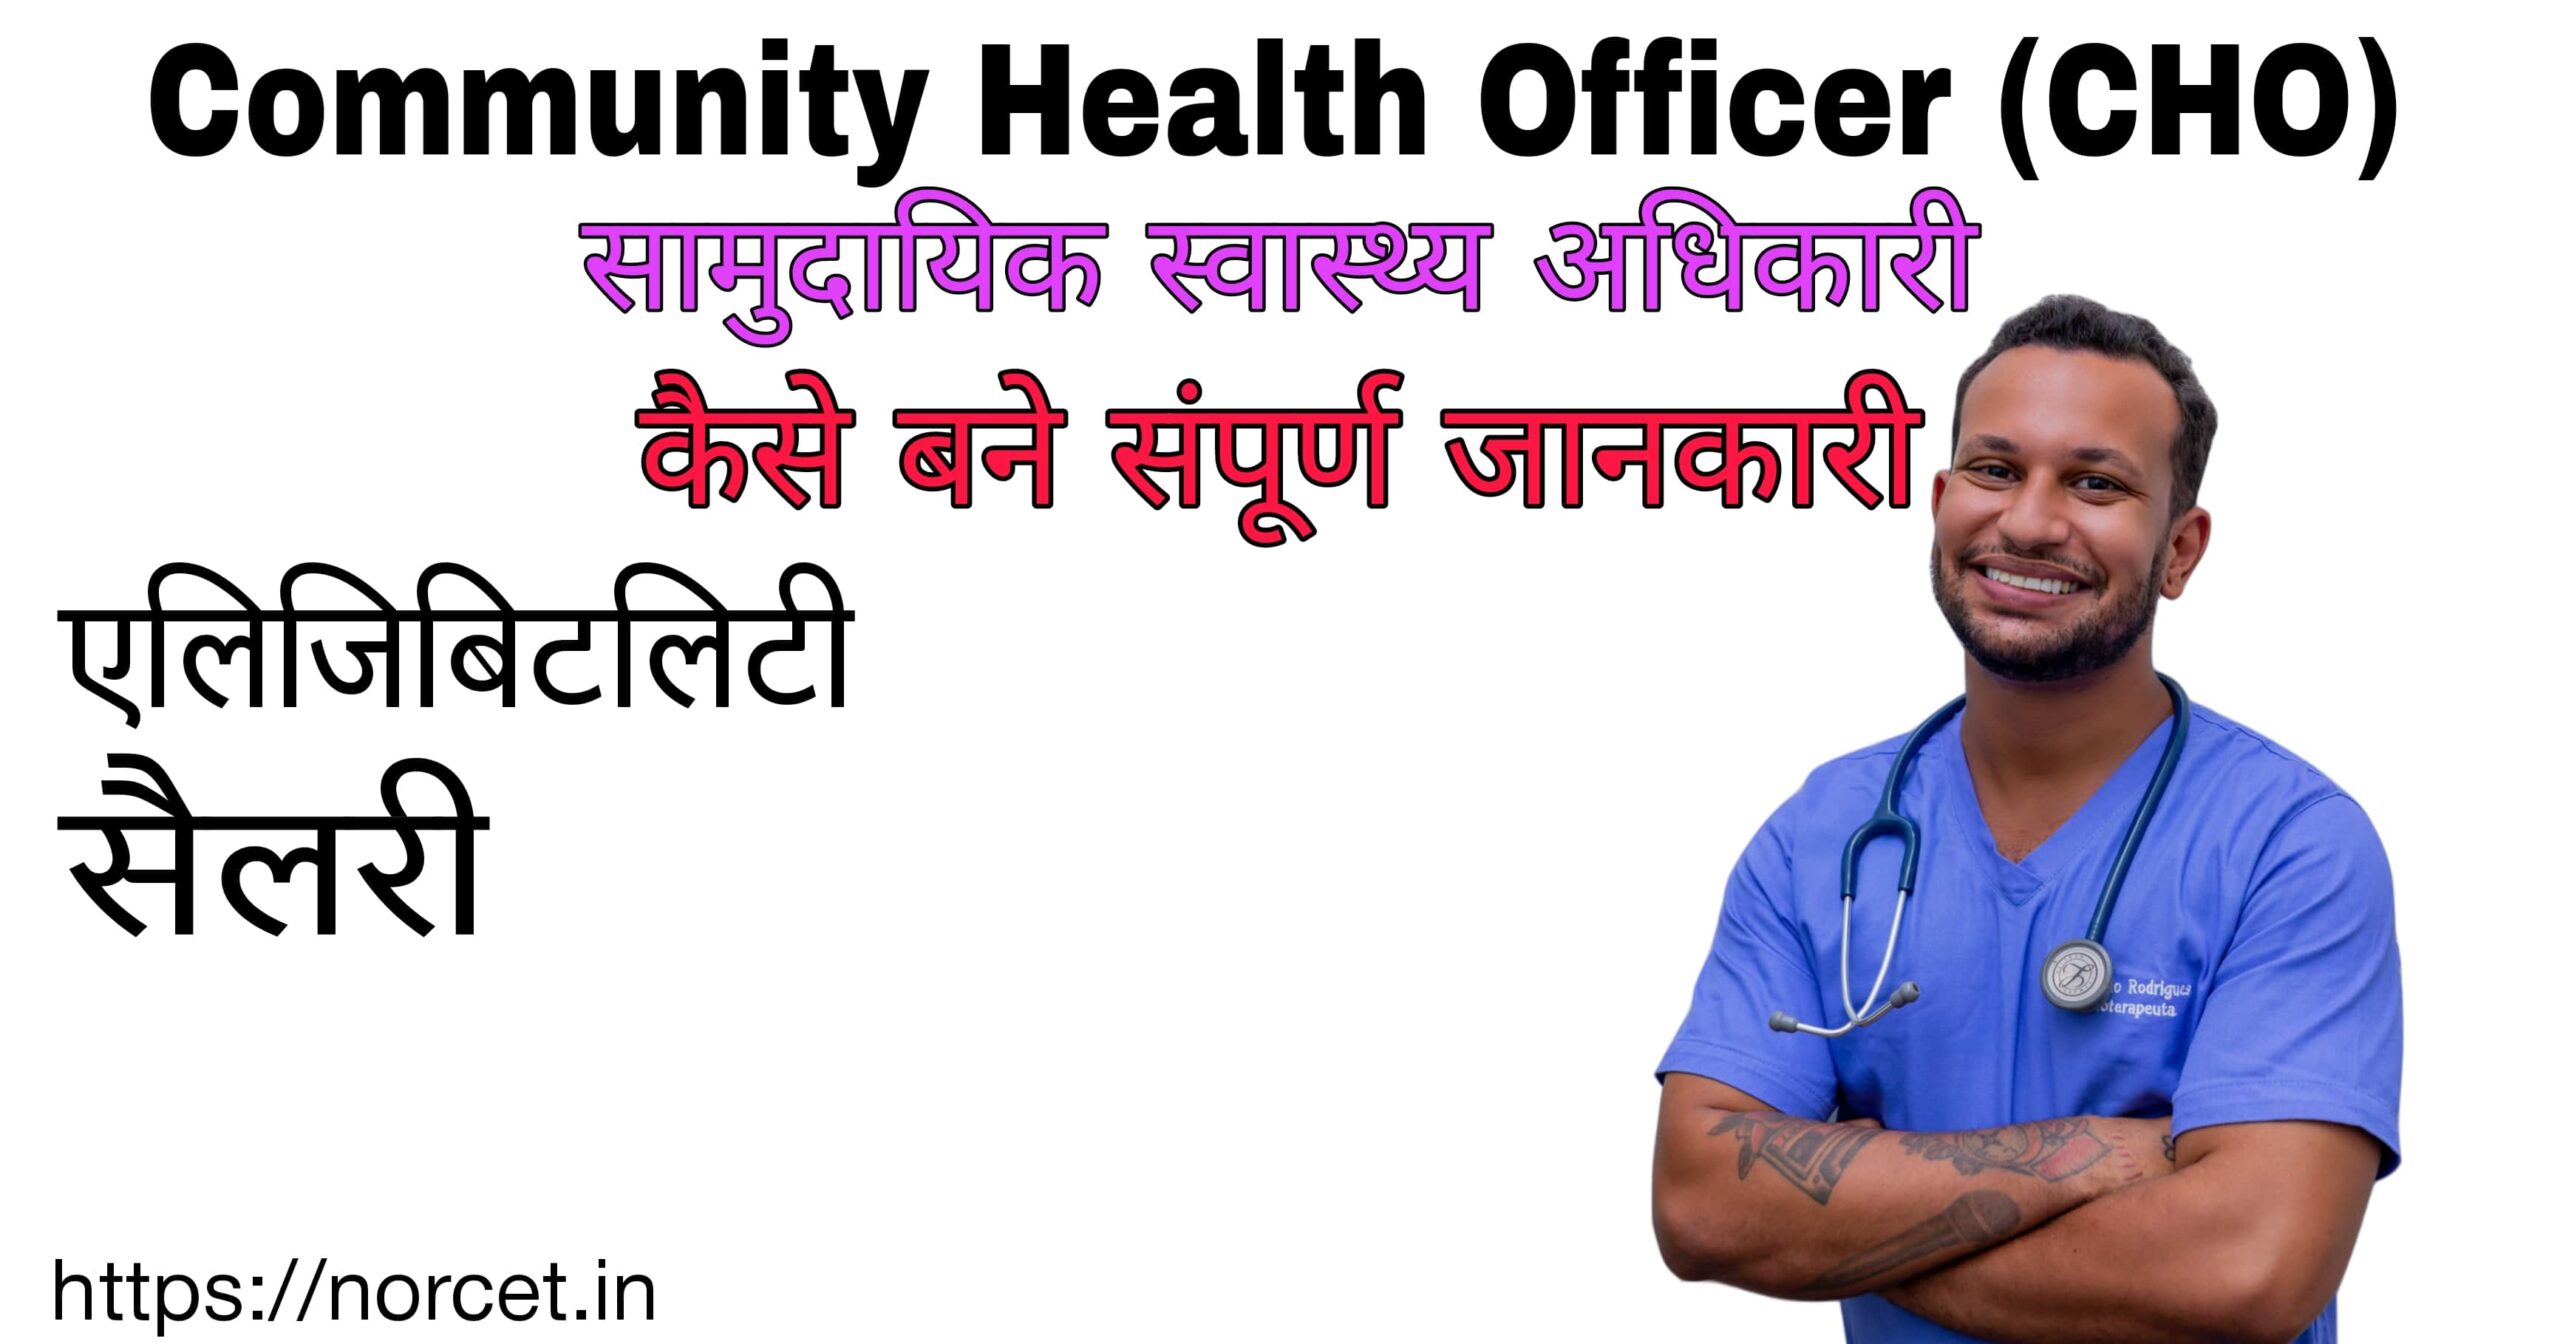 How to become a Community Health Officer